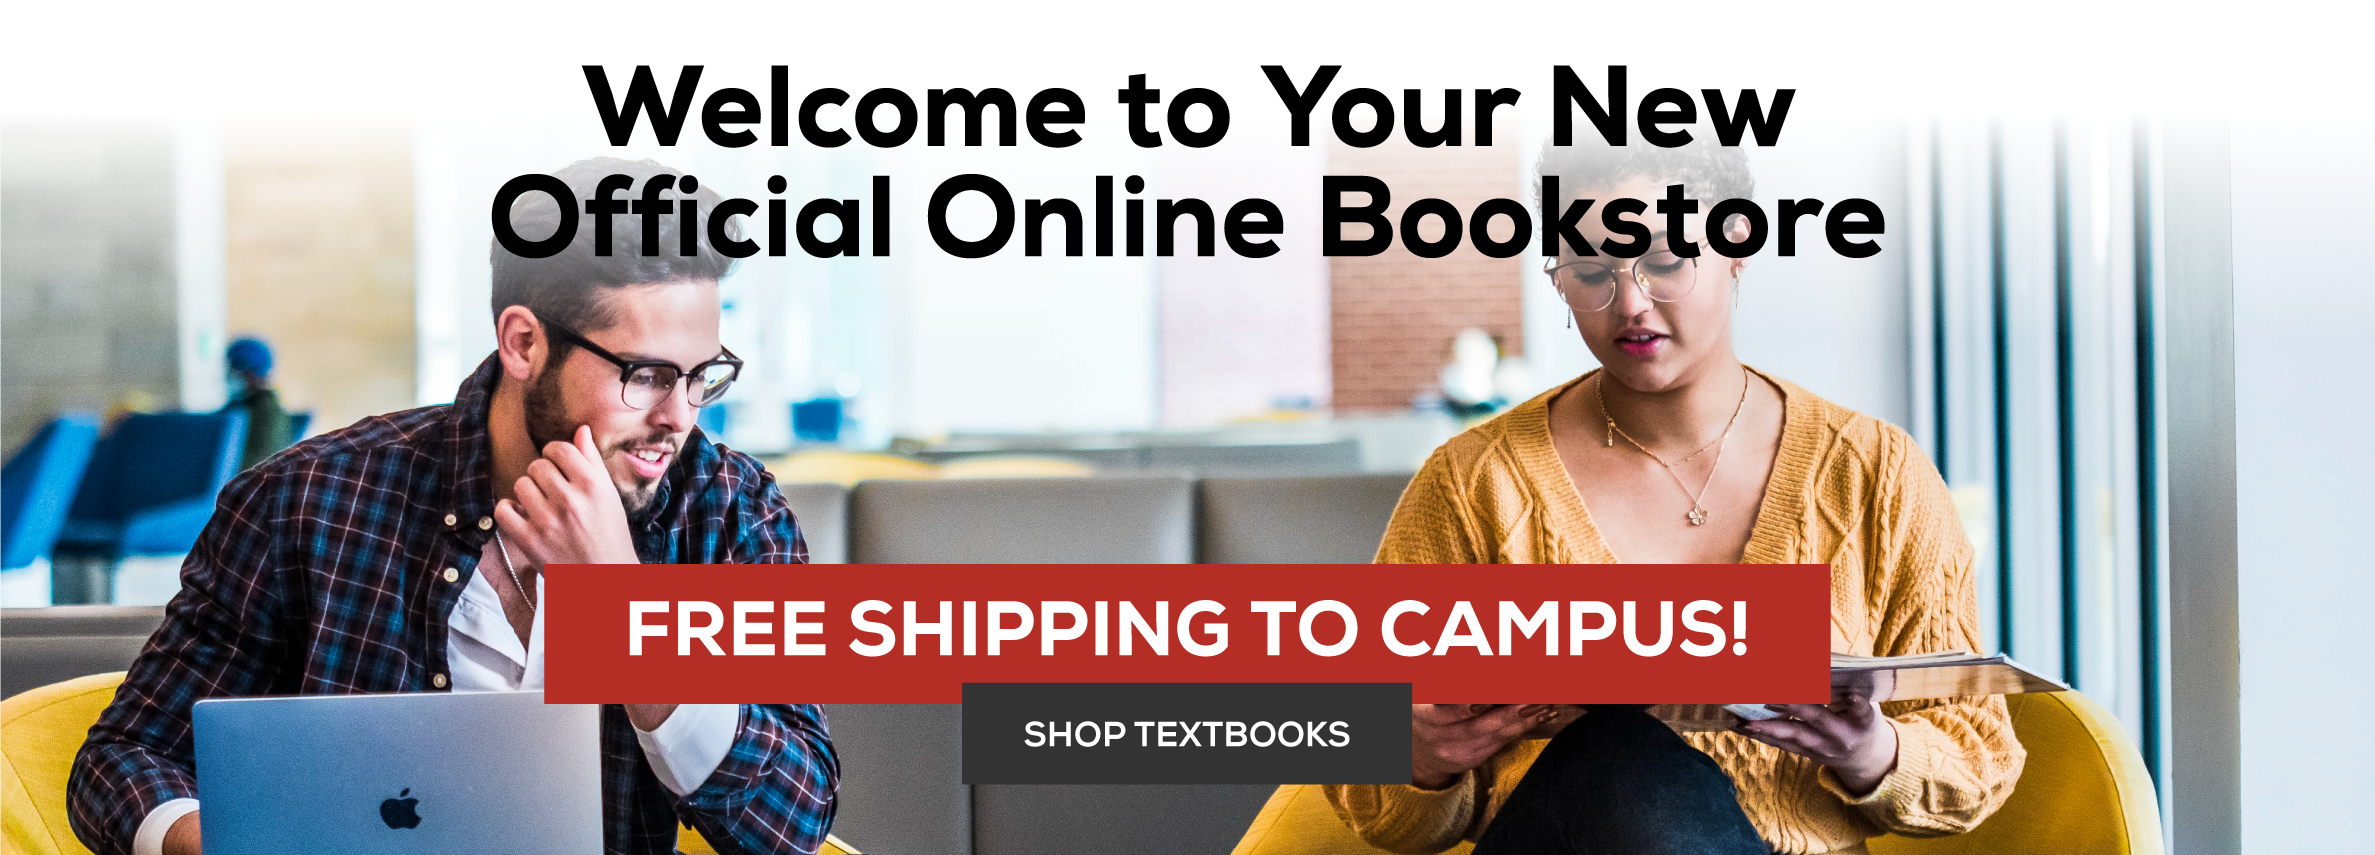 Welcome to Your Official Online Bookstore Free Shipping to Campus